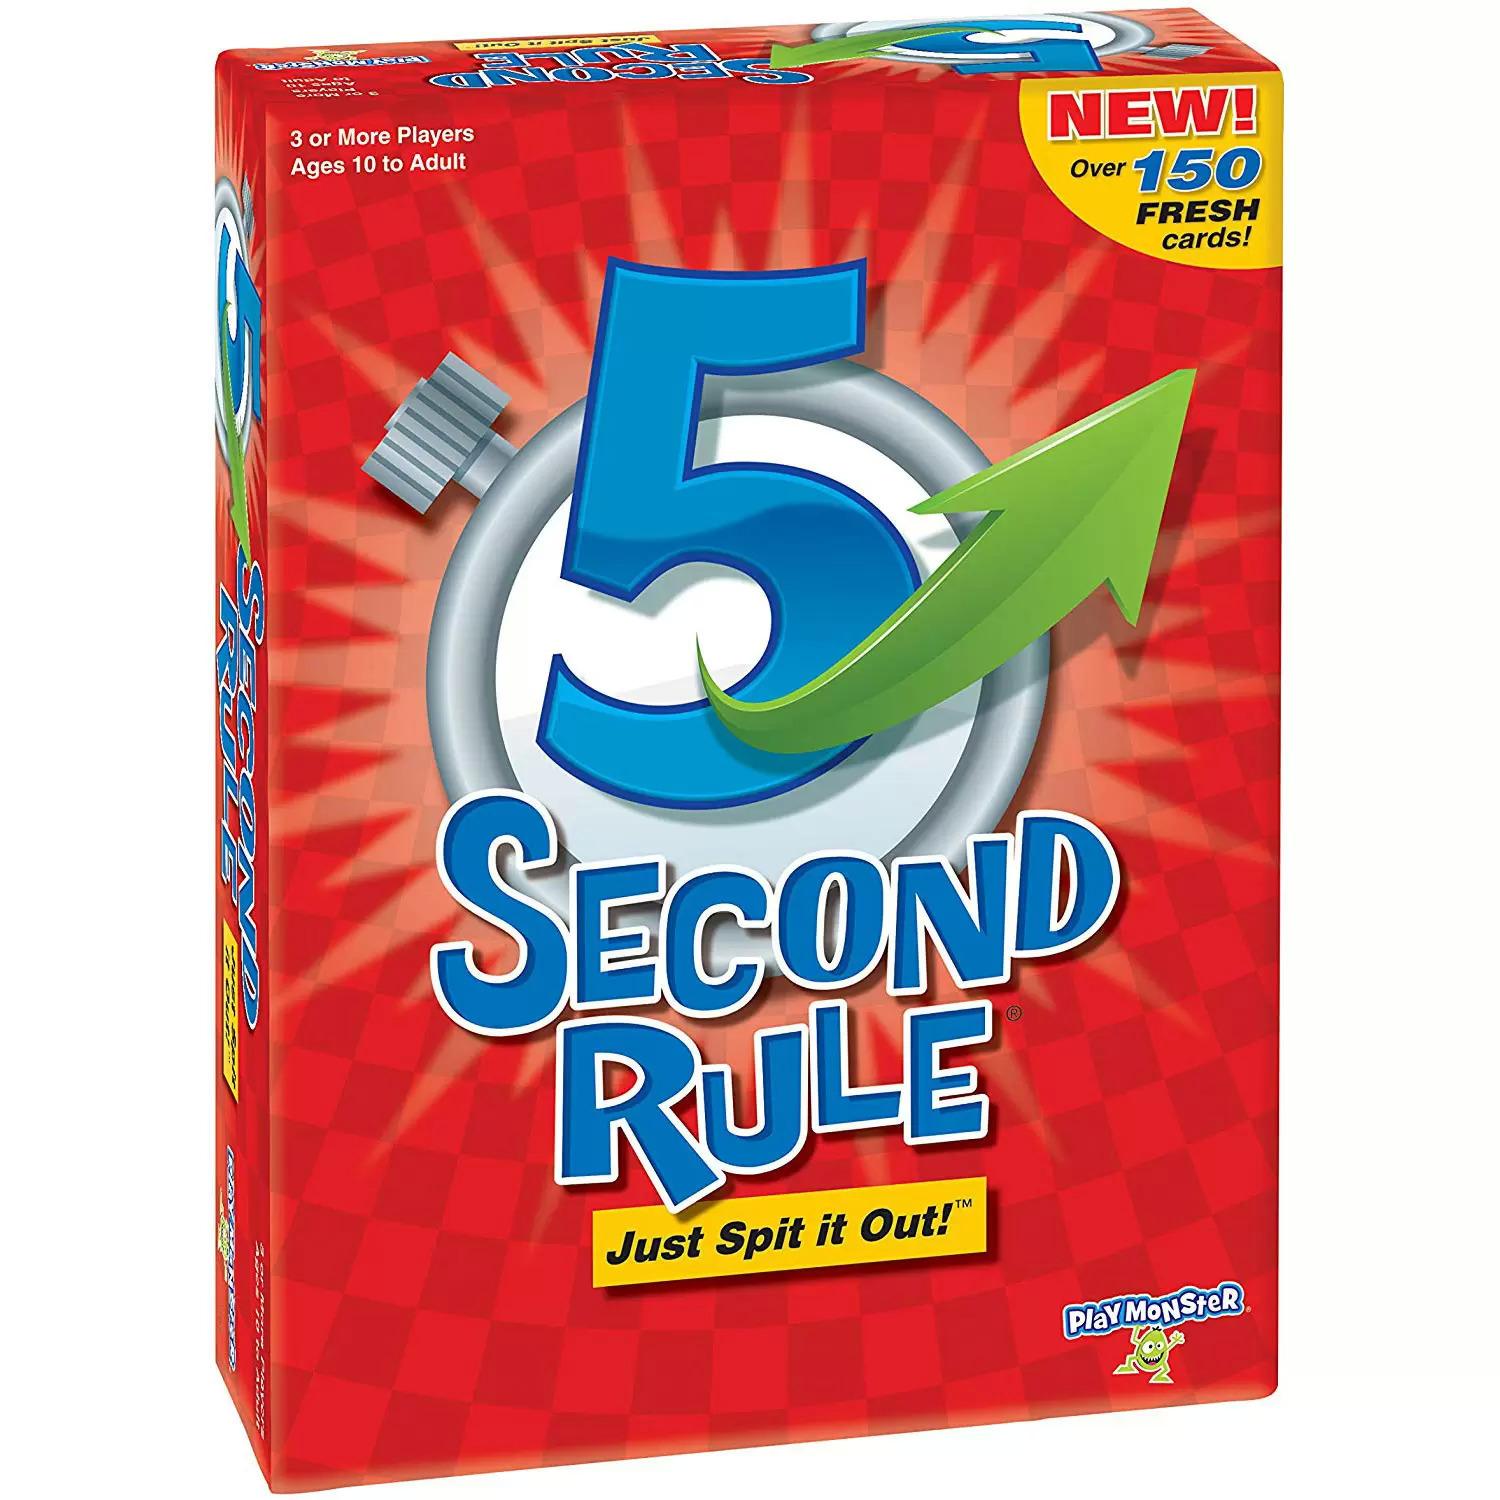 5 Second Rule Board Game for $10.49